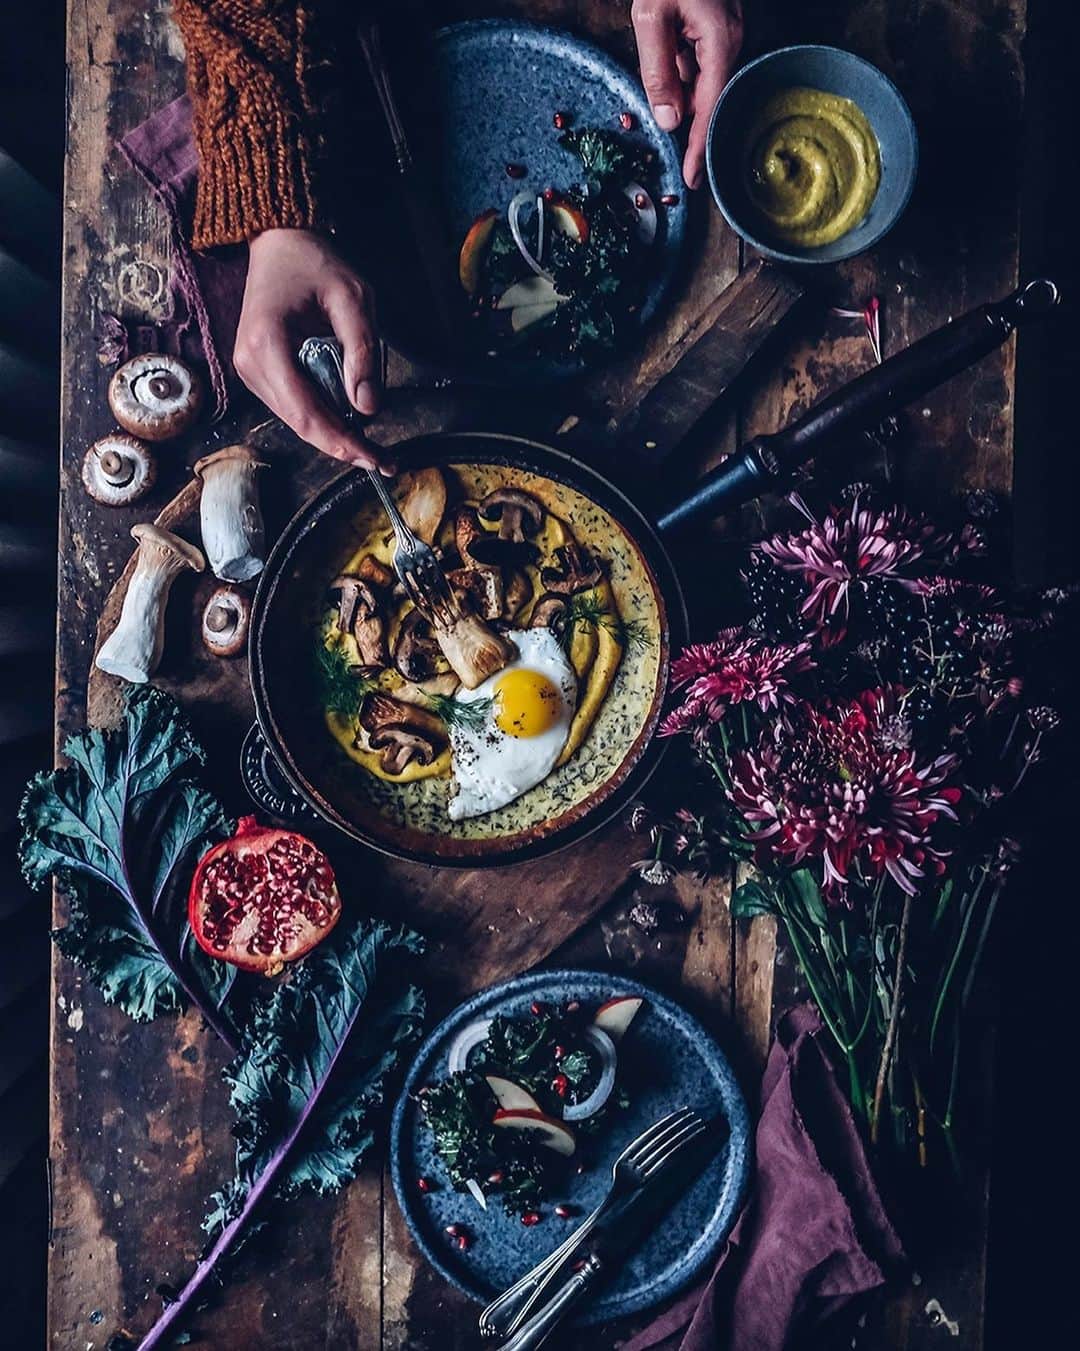 Our Food Storiesのインスタグラム：「One of our favorite recipes right now - this simple and delicious gluten-free dutch baby with hummus, mushrooms and egg😋 Get the recipe on the blog, link is in profile. #ourfoodstories  ____ #gatheringslikethese #fellowmag #simplejoys #onthetable #foodstylist #foodphotographer #germanfoodblogger #momentslikethese #countrysideliving #dutchbaby #glutenfreefood #glutenfreerecipes #glutenfri #glutenfrei #lunchrecipes #breakfastideas」